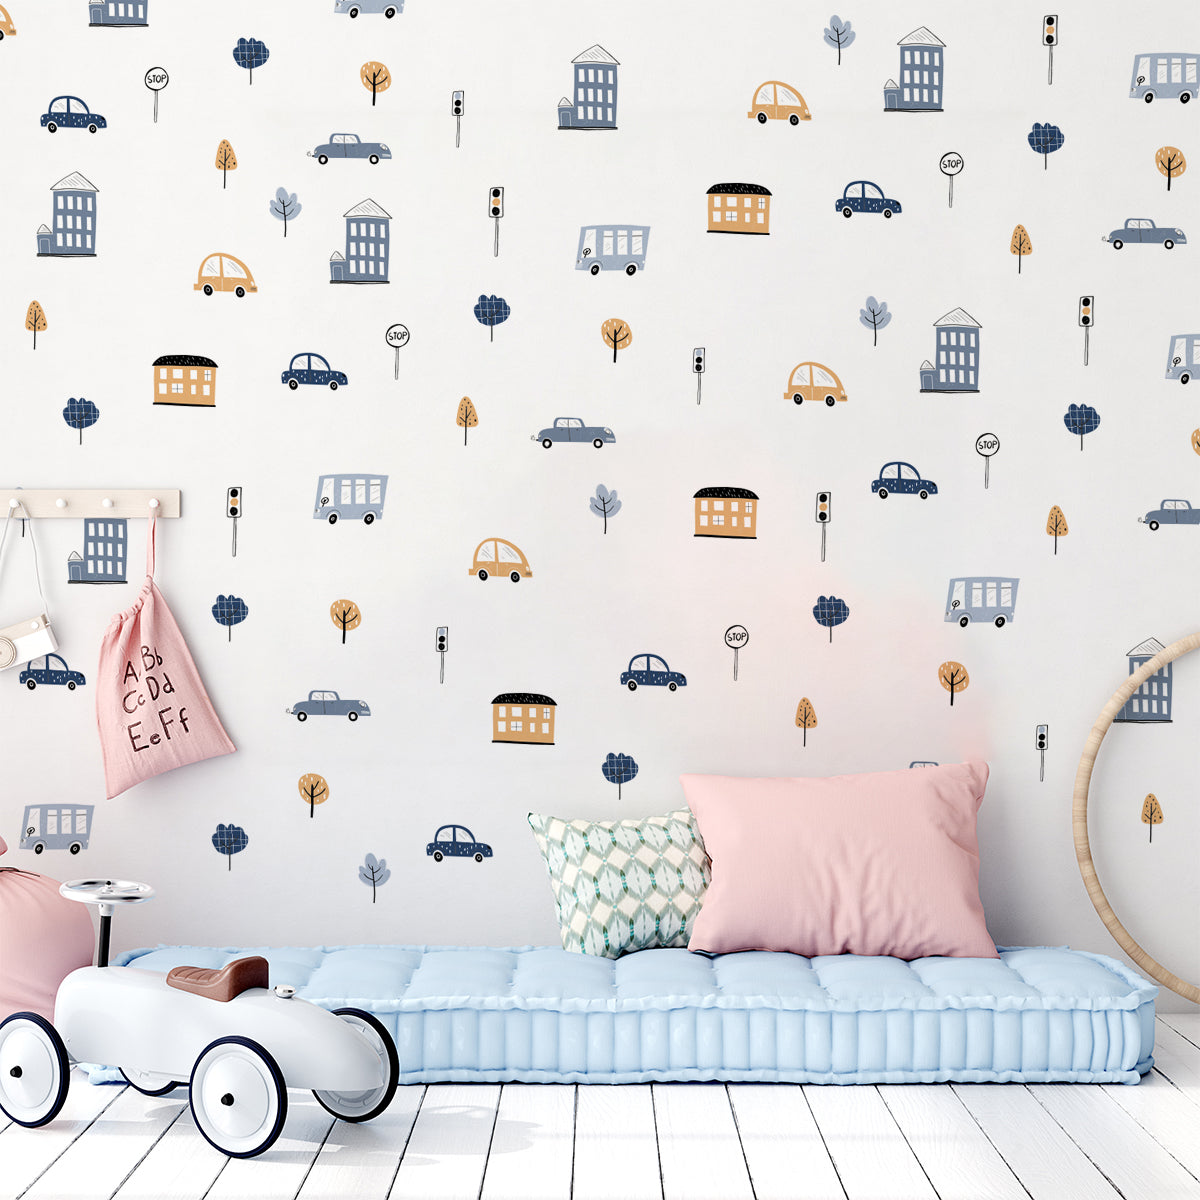 kids bedroom wall sticker, nursery wall sticker, wall sticker, wall decal , wall tottoo, cars wall sticker, vehicles wall sticker, houses wall stickers, trucks wall sticker, wall stickers with cars, boys wall sticker, vehicles wall sticker, wall stickers with houses and cars